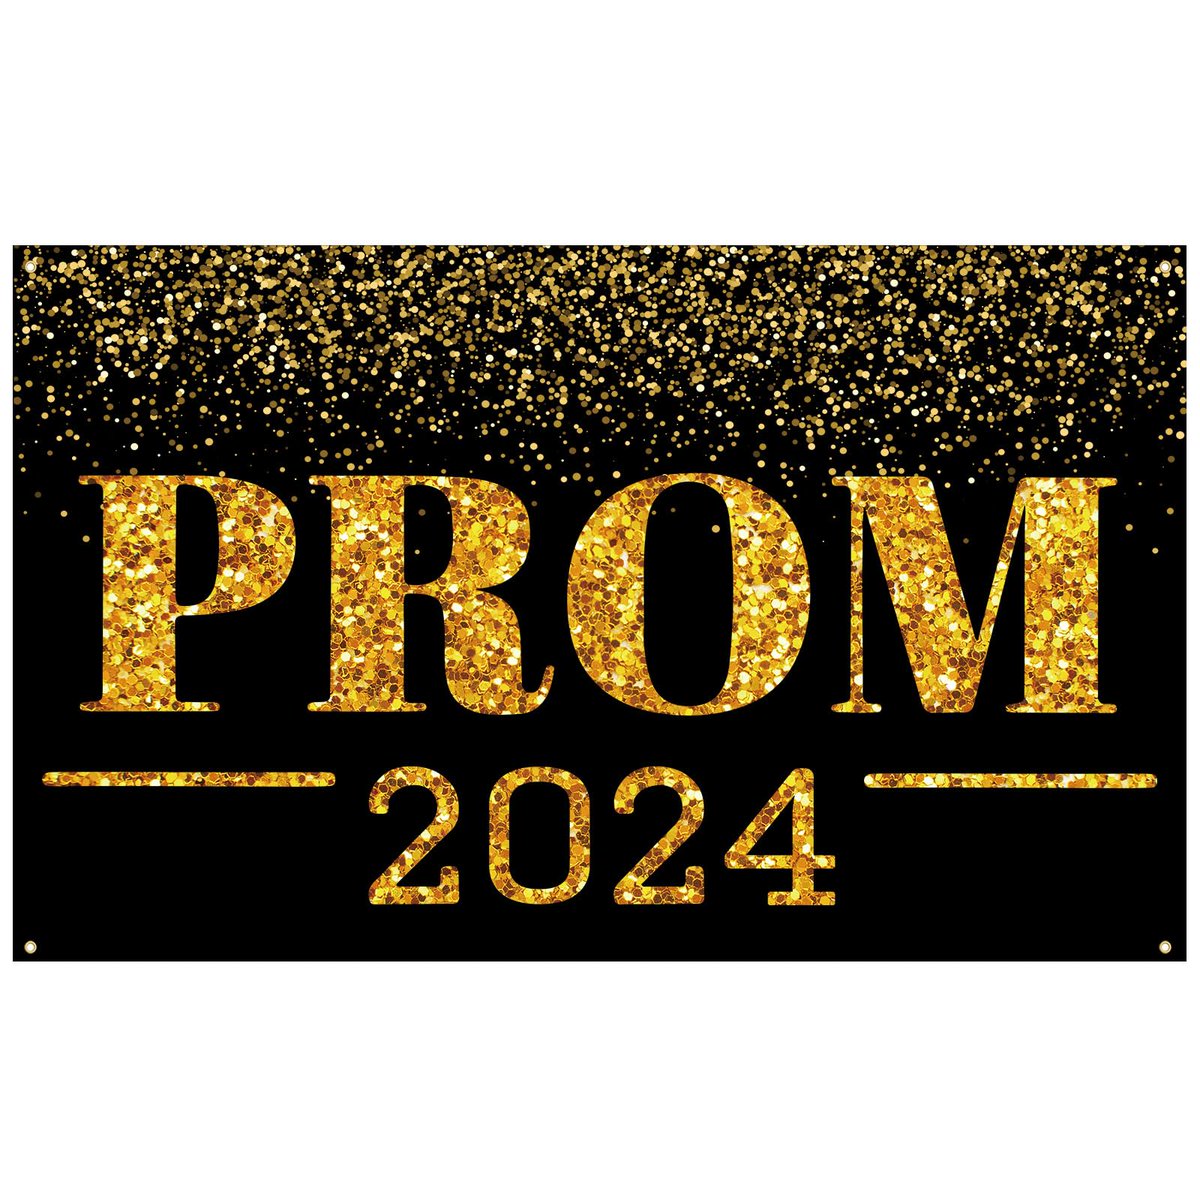 If you plan to attend this year's prom you MUST complete the prom contract and ensure that your dues are paid. If you plan to bring a guest you must turn in a hard copy of your guest form along with $25. All prom forms and payments are due no later than Thursday, April 11th.